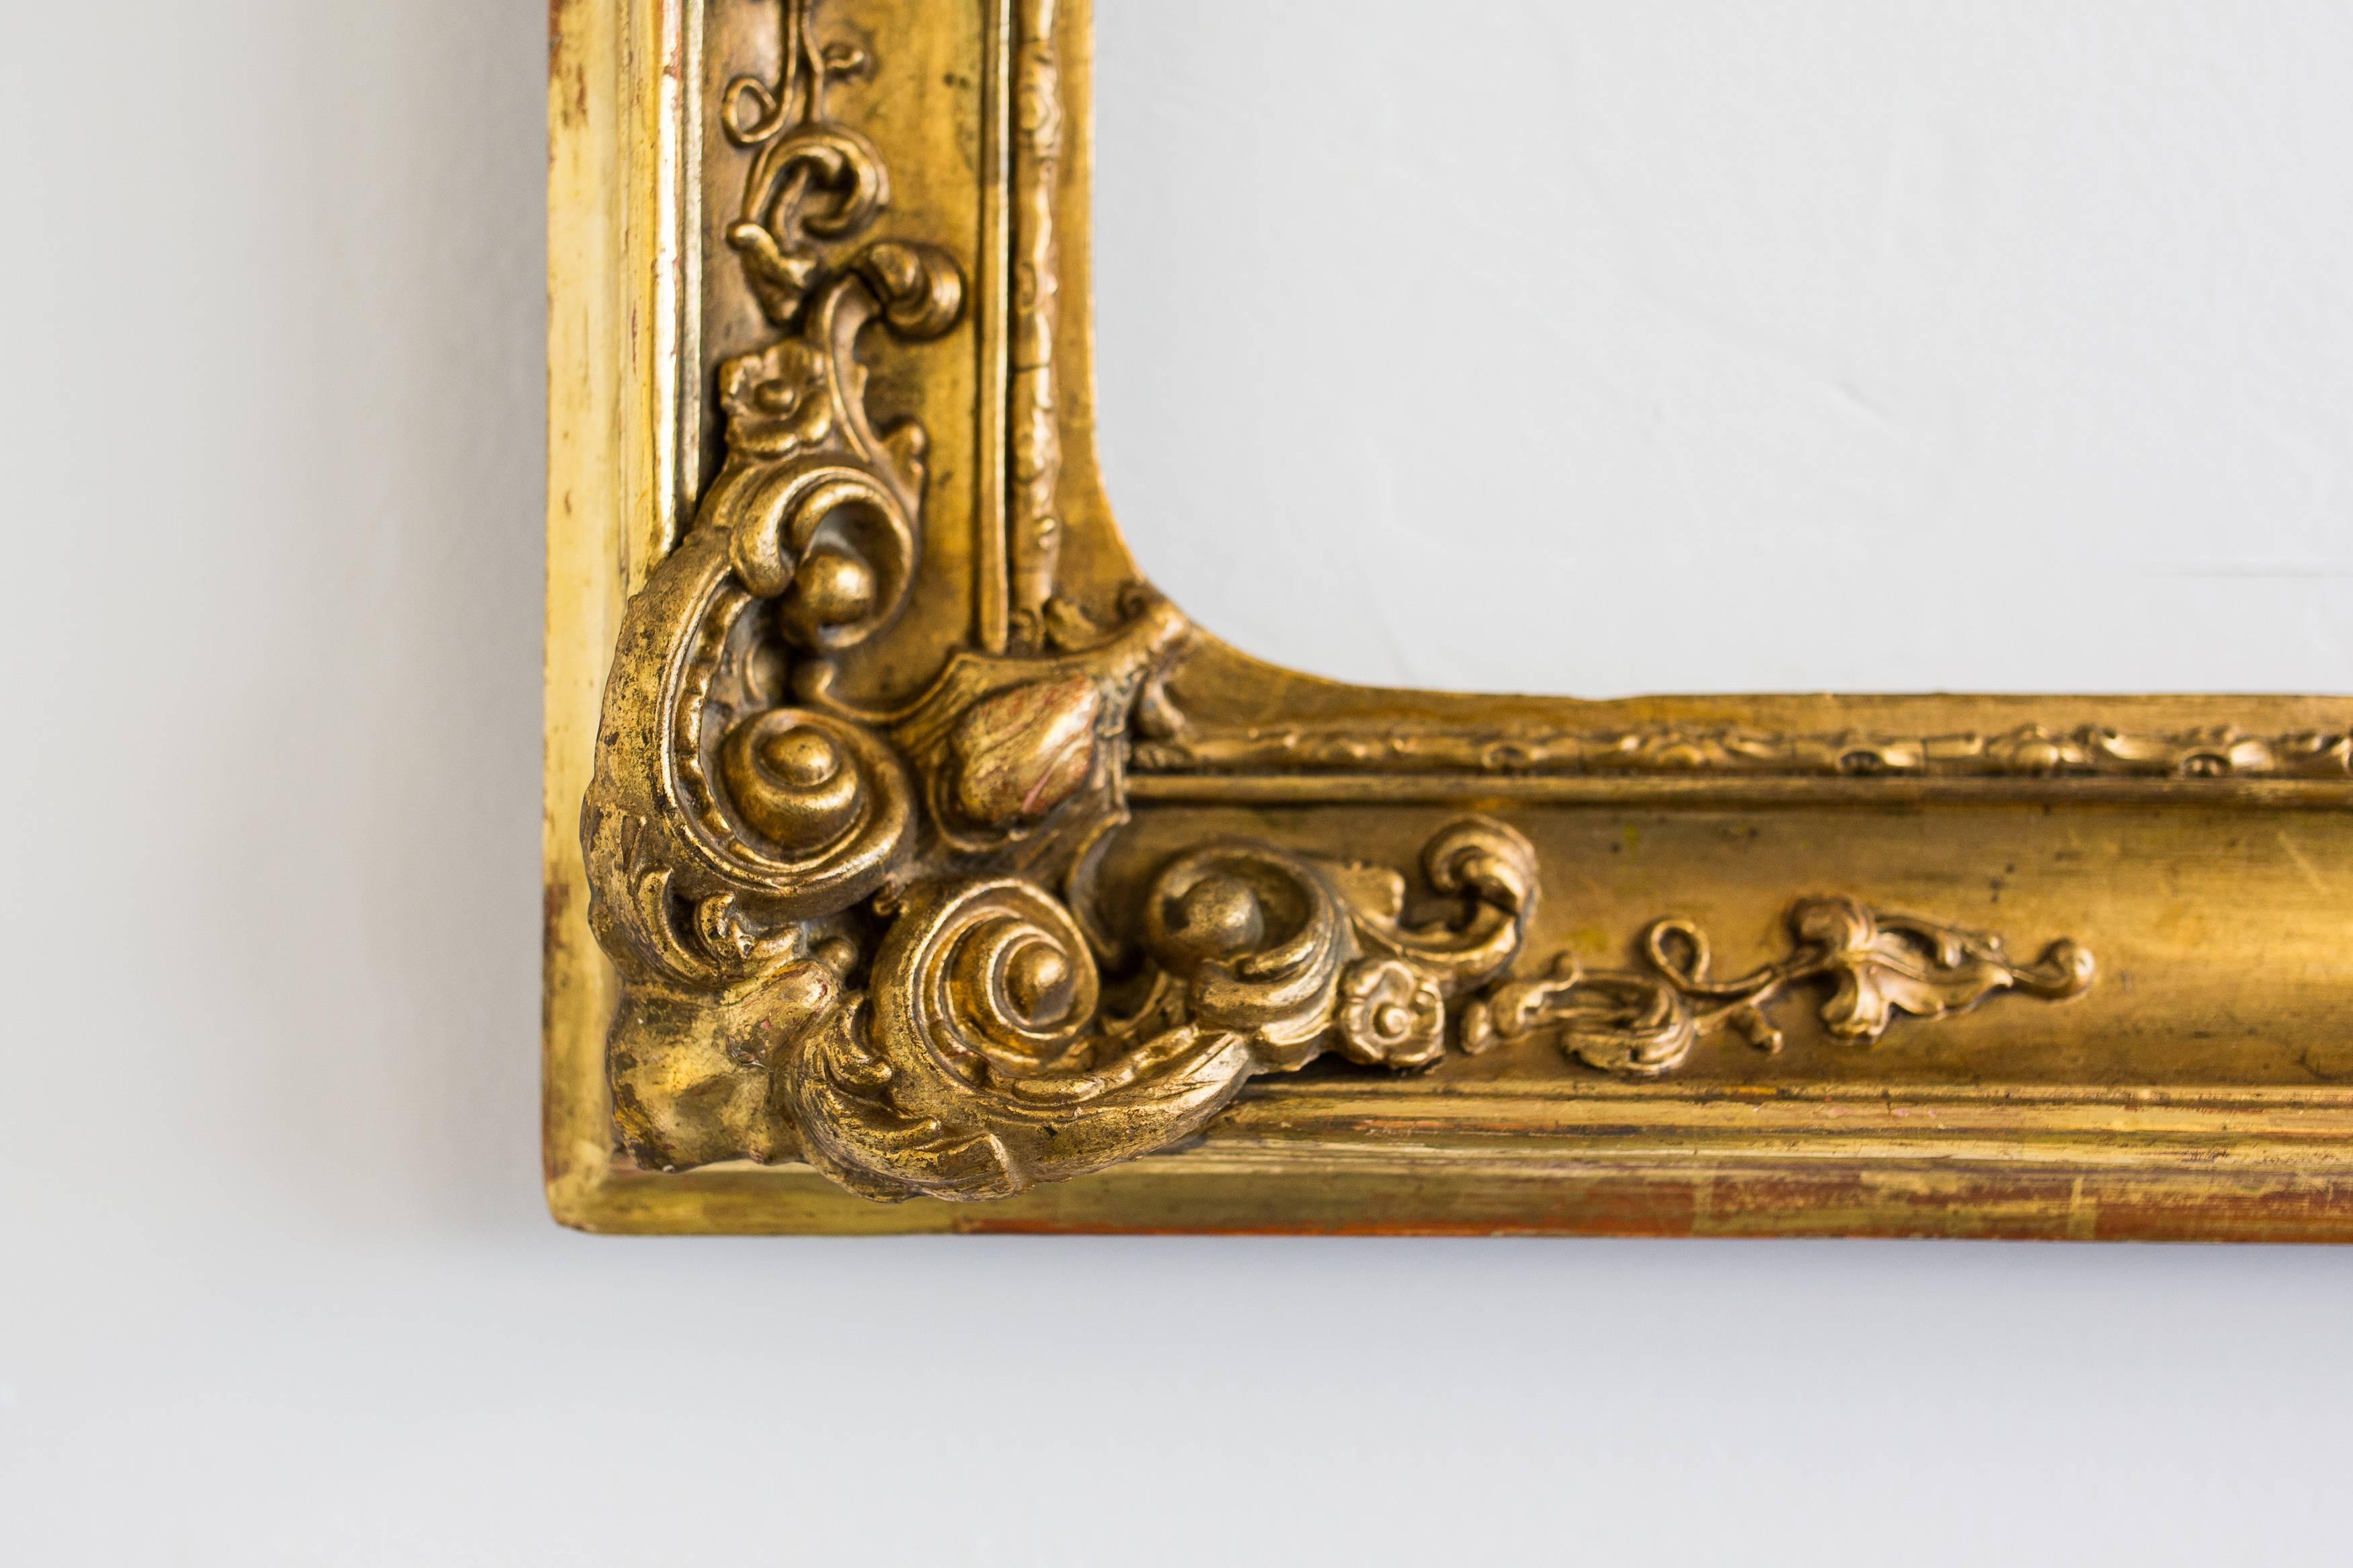 This frame is gold leaf coated on red Bolus, shining through partially and decorated with beautifully floral stucco ornaments.
The frame is in absolute original condition, no former restorations! On the side there are some leftovers of old paper